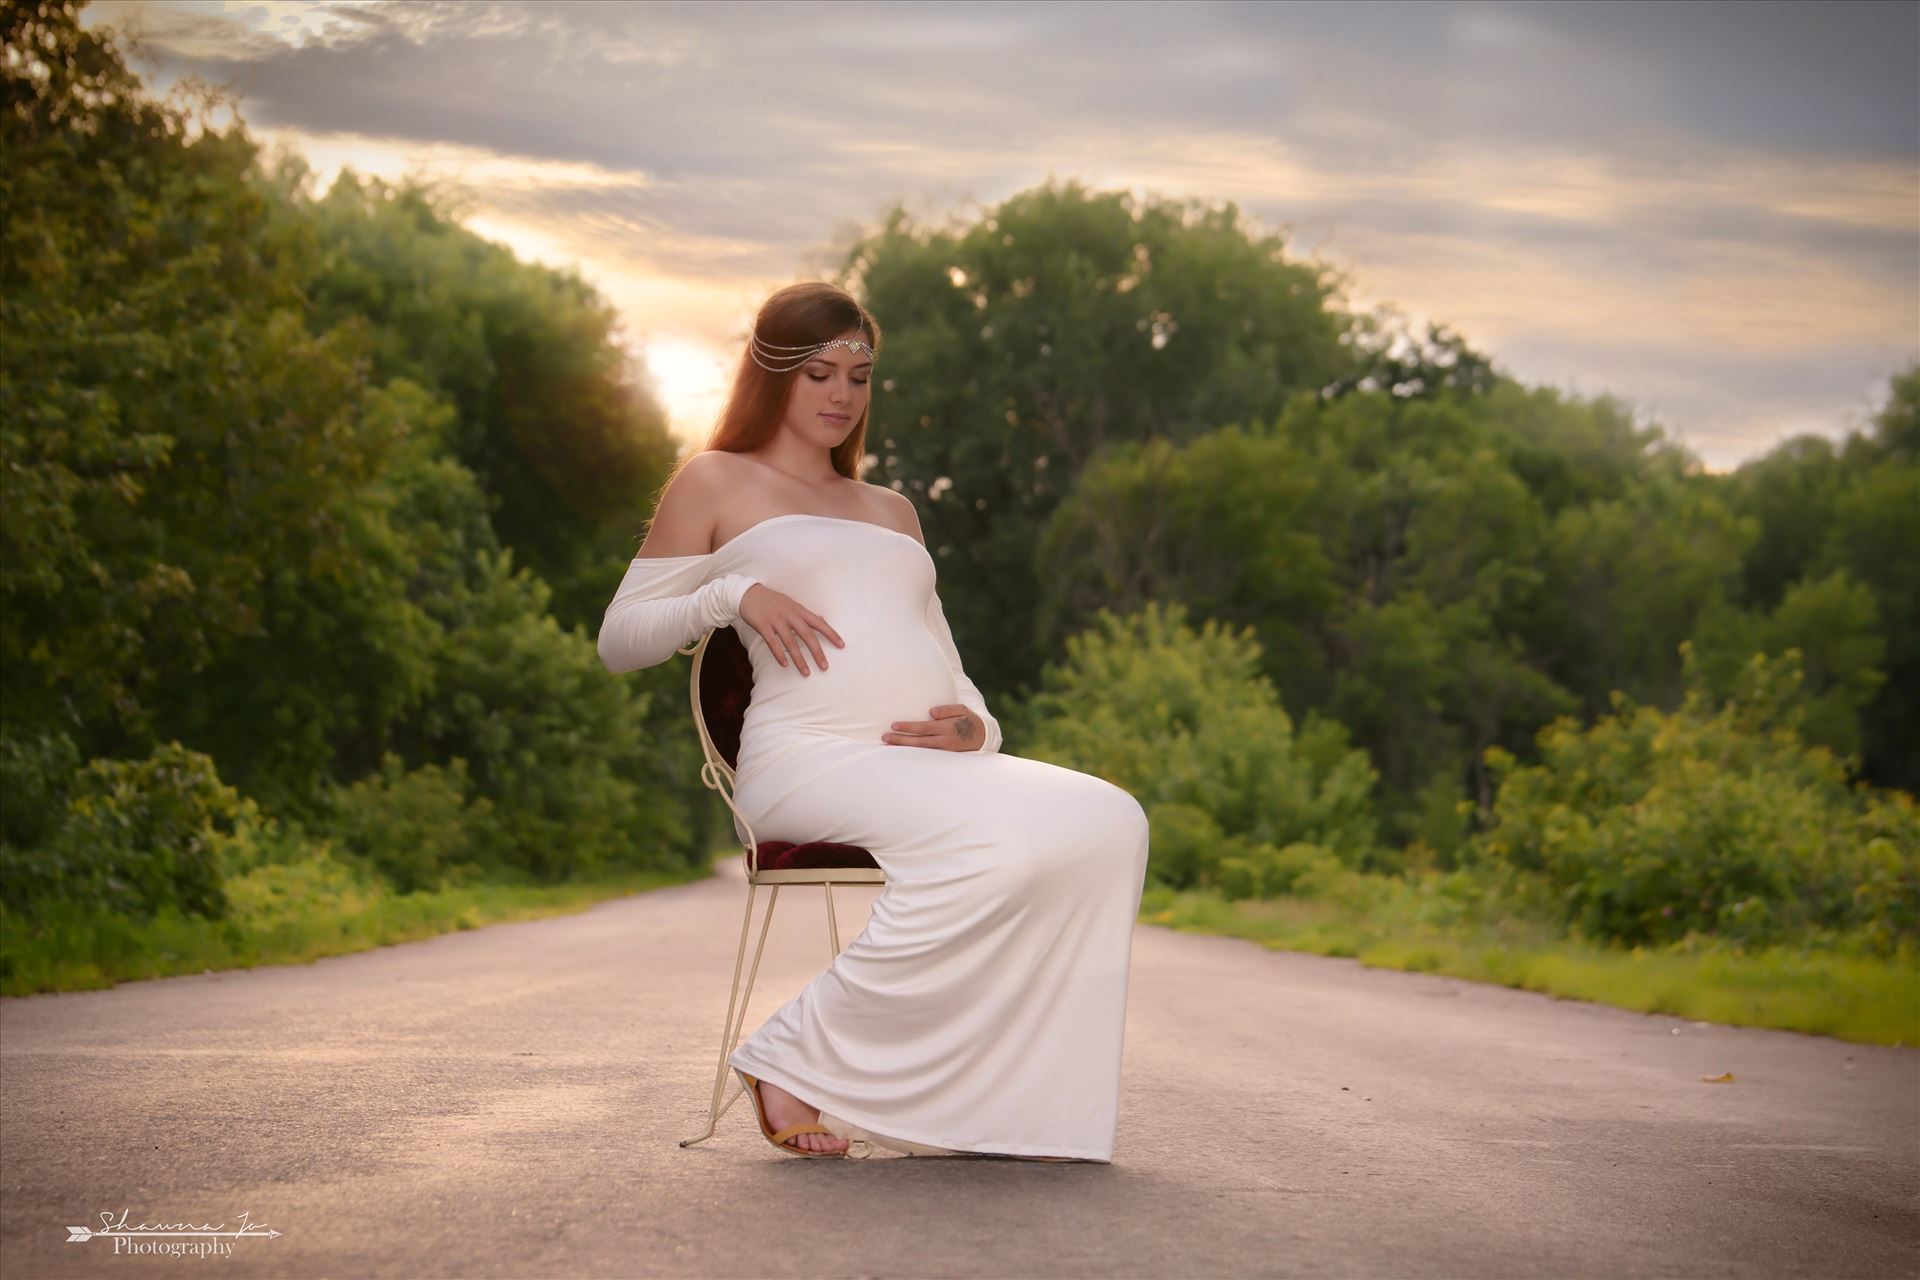 DSC_4781editwm.jpg This mama is absolute stunning in all her pregnancy beauty by Shawna Jo Photography